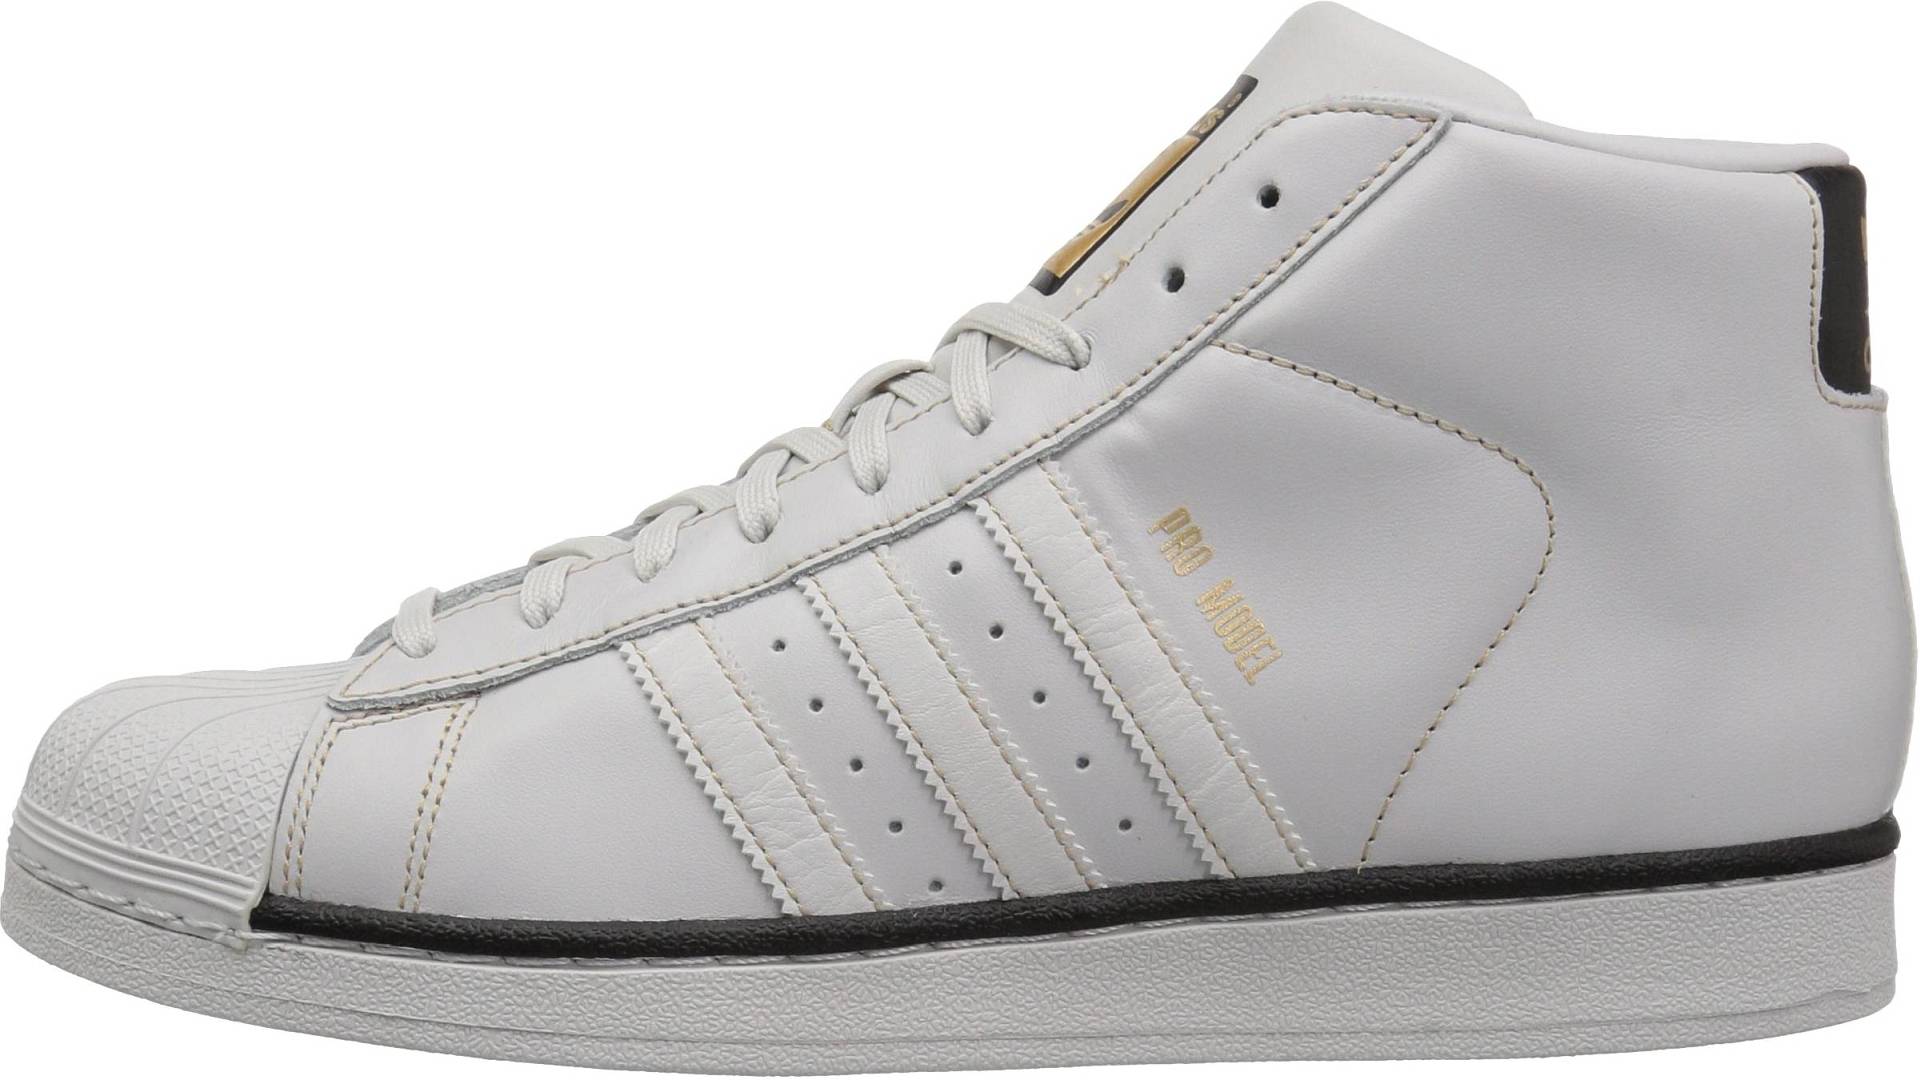 Adidas Pro Model – Shoes Reviews & Reasons To Buy